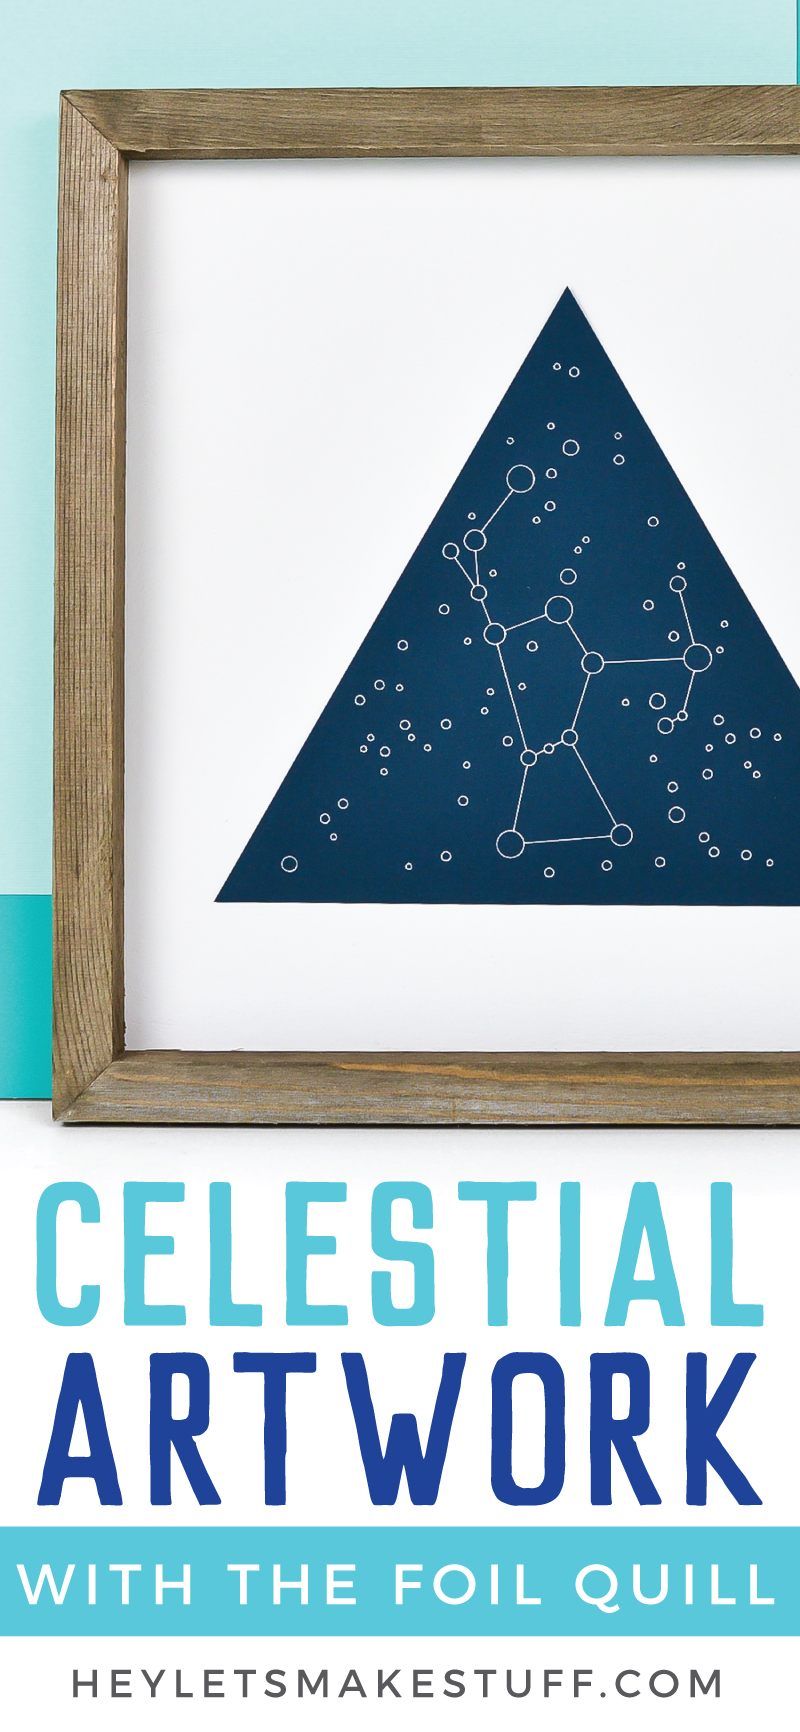 A wooden framed picture of the Orion constellation and advertising from HEYLETSMAKESTUFF.COM for Celestial Artwork with the Foil Quill